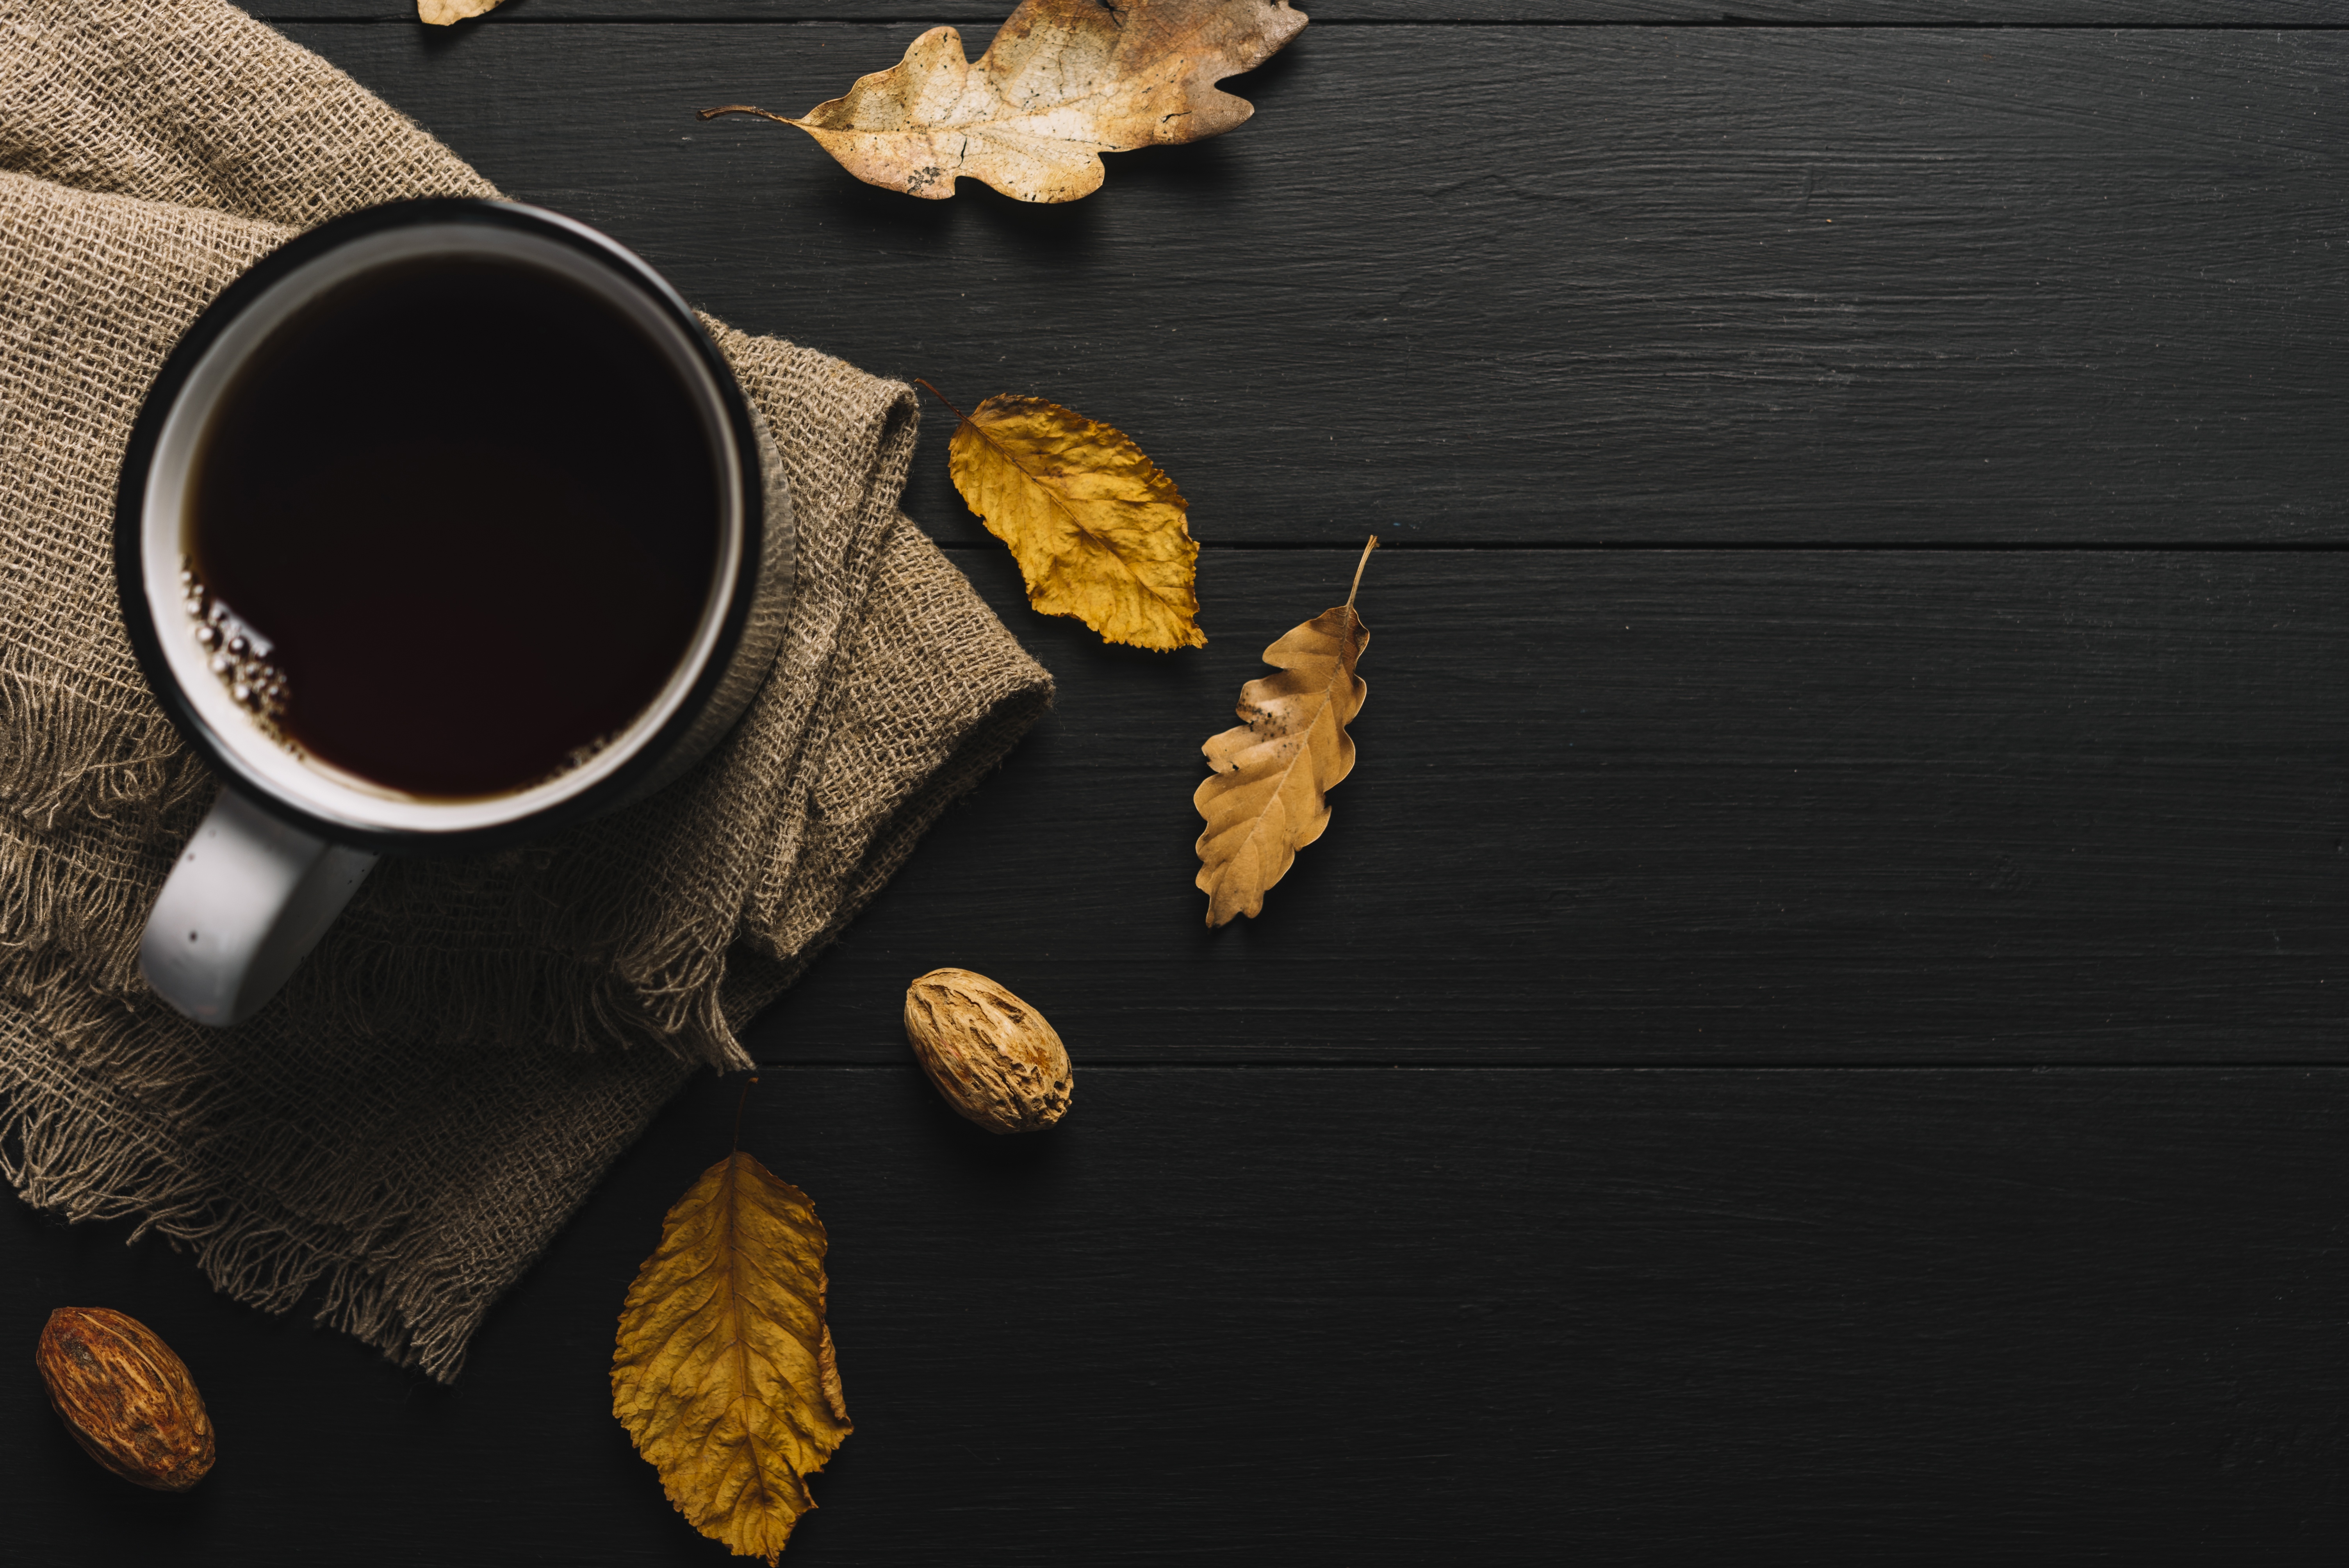 Autumn coffee mug with leaves on the table